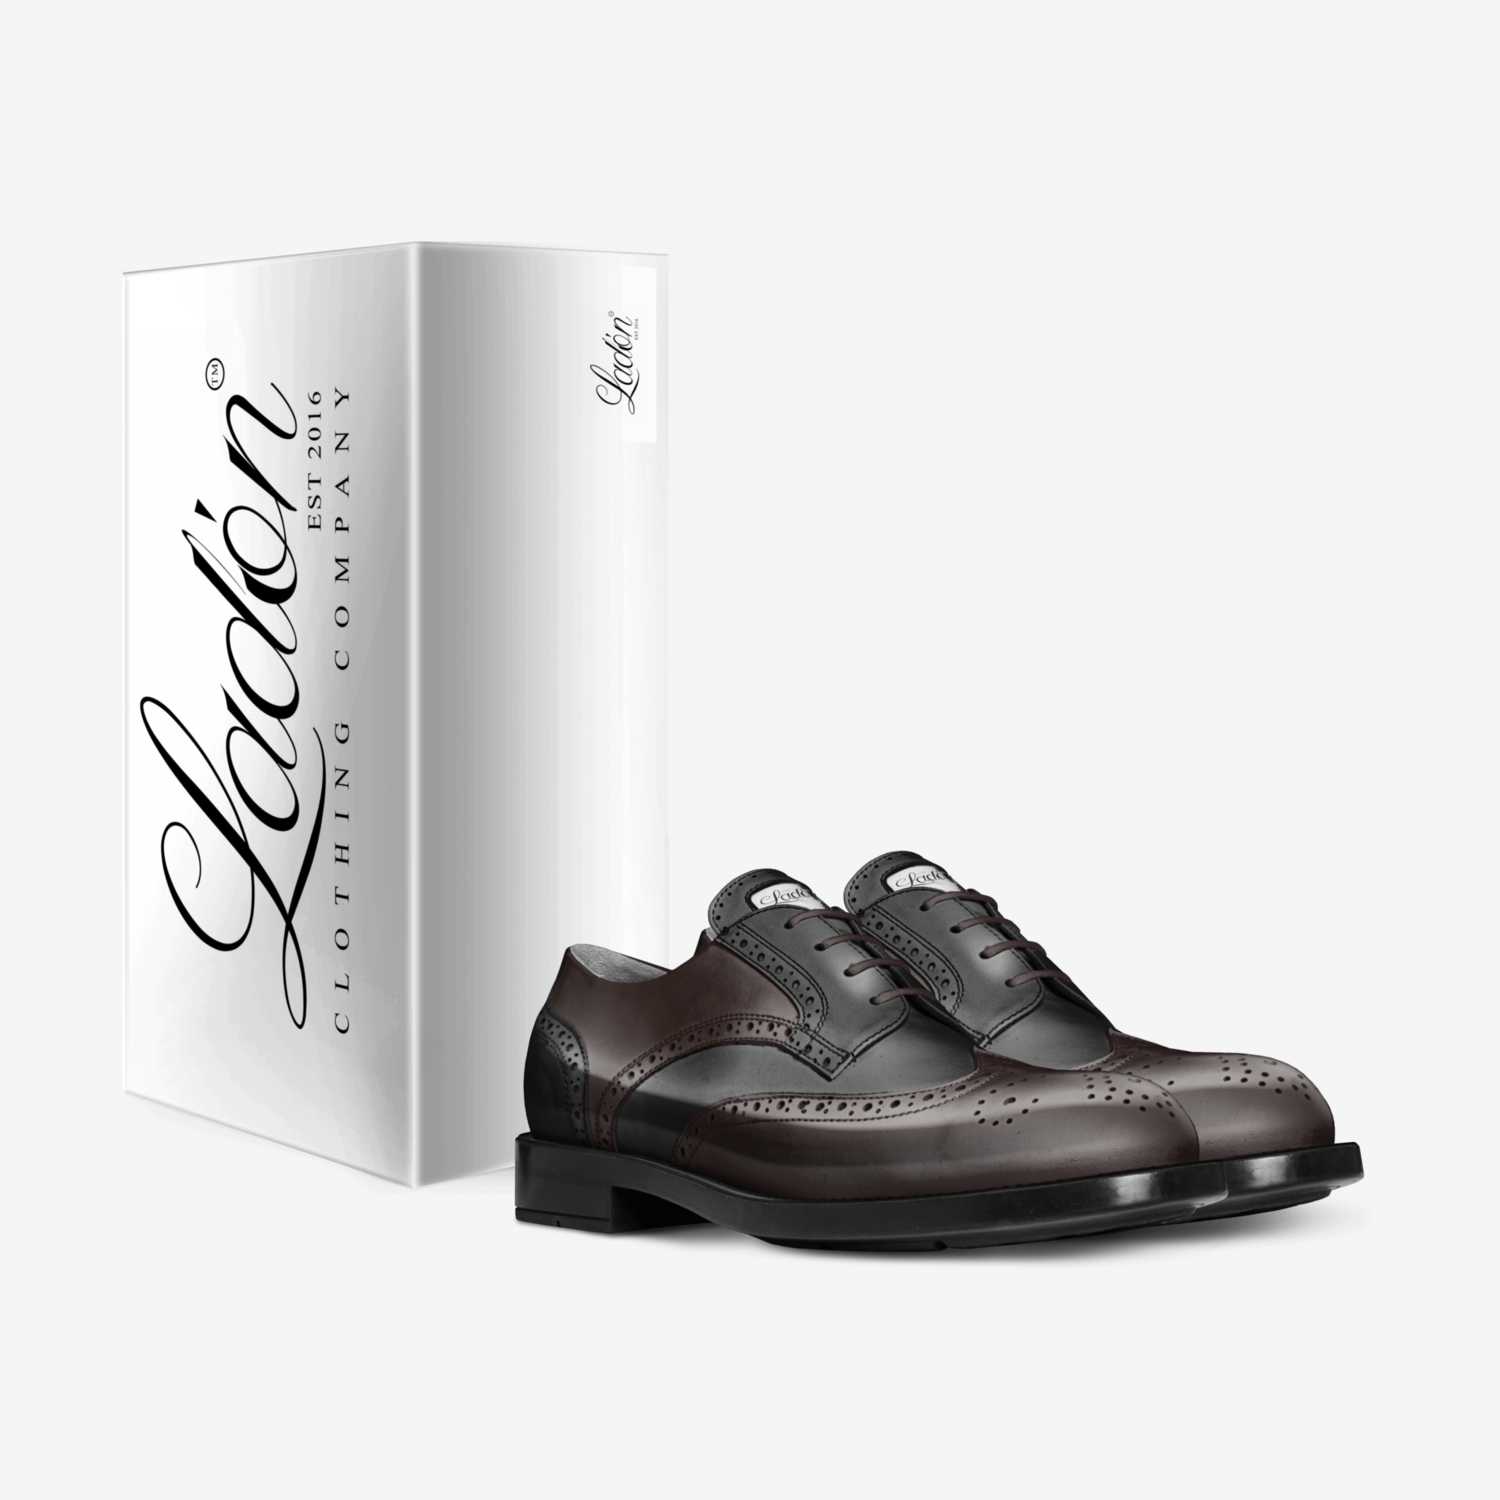 Ladón  custom made in Italy shoes by Ladón Clothing Company | Box view